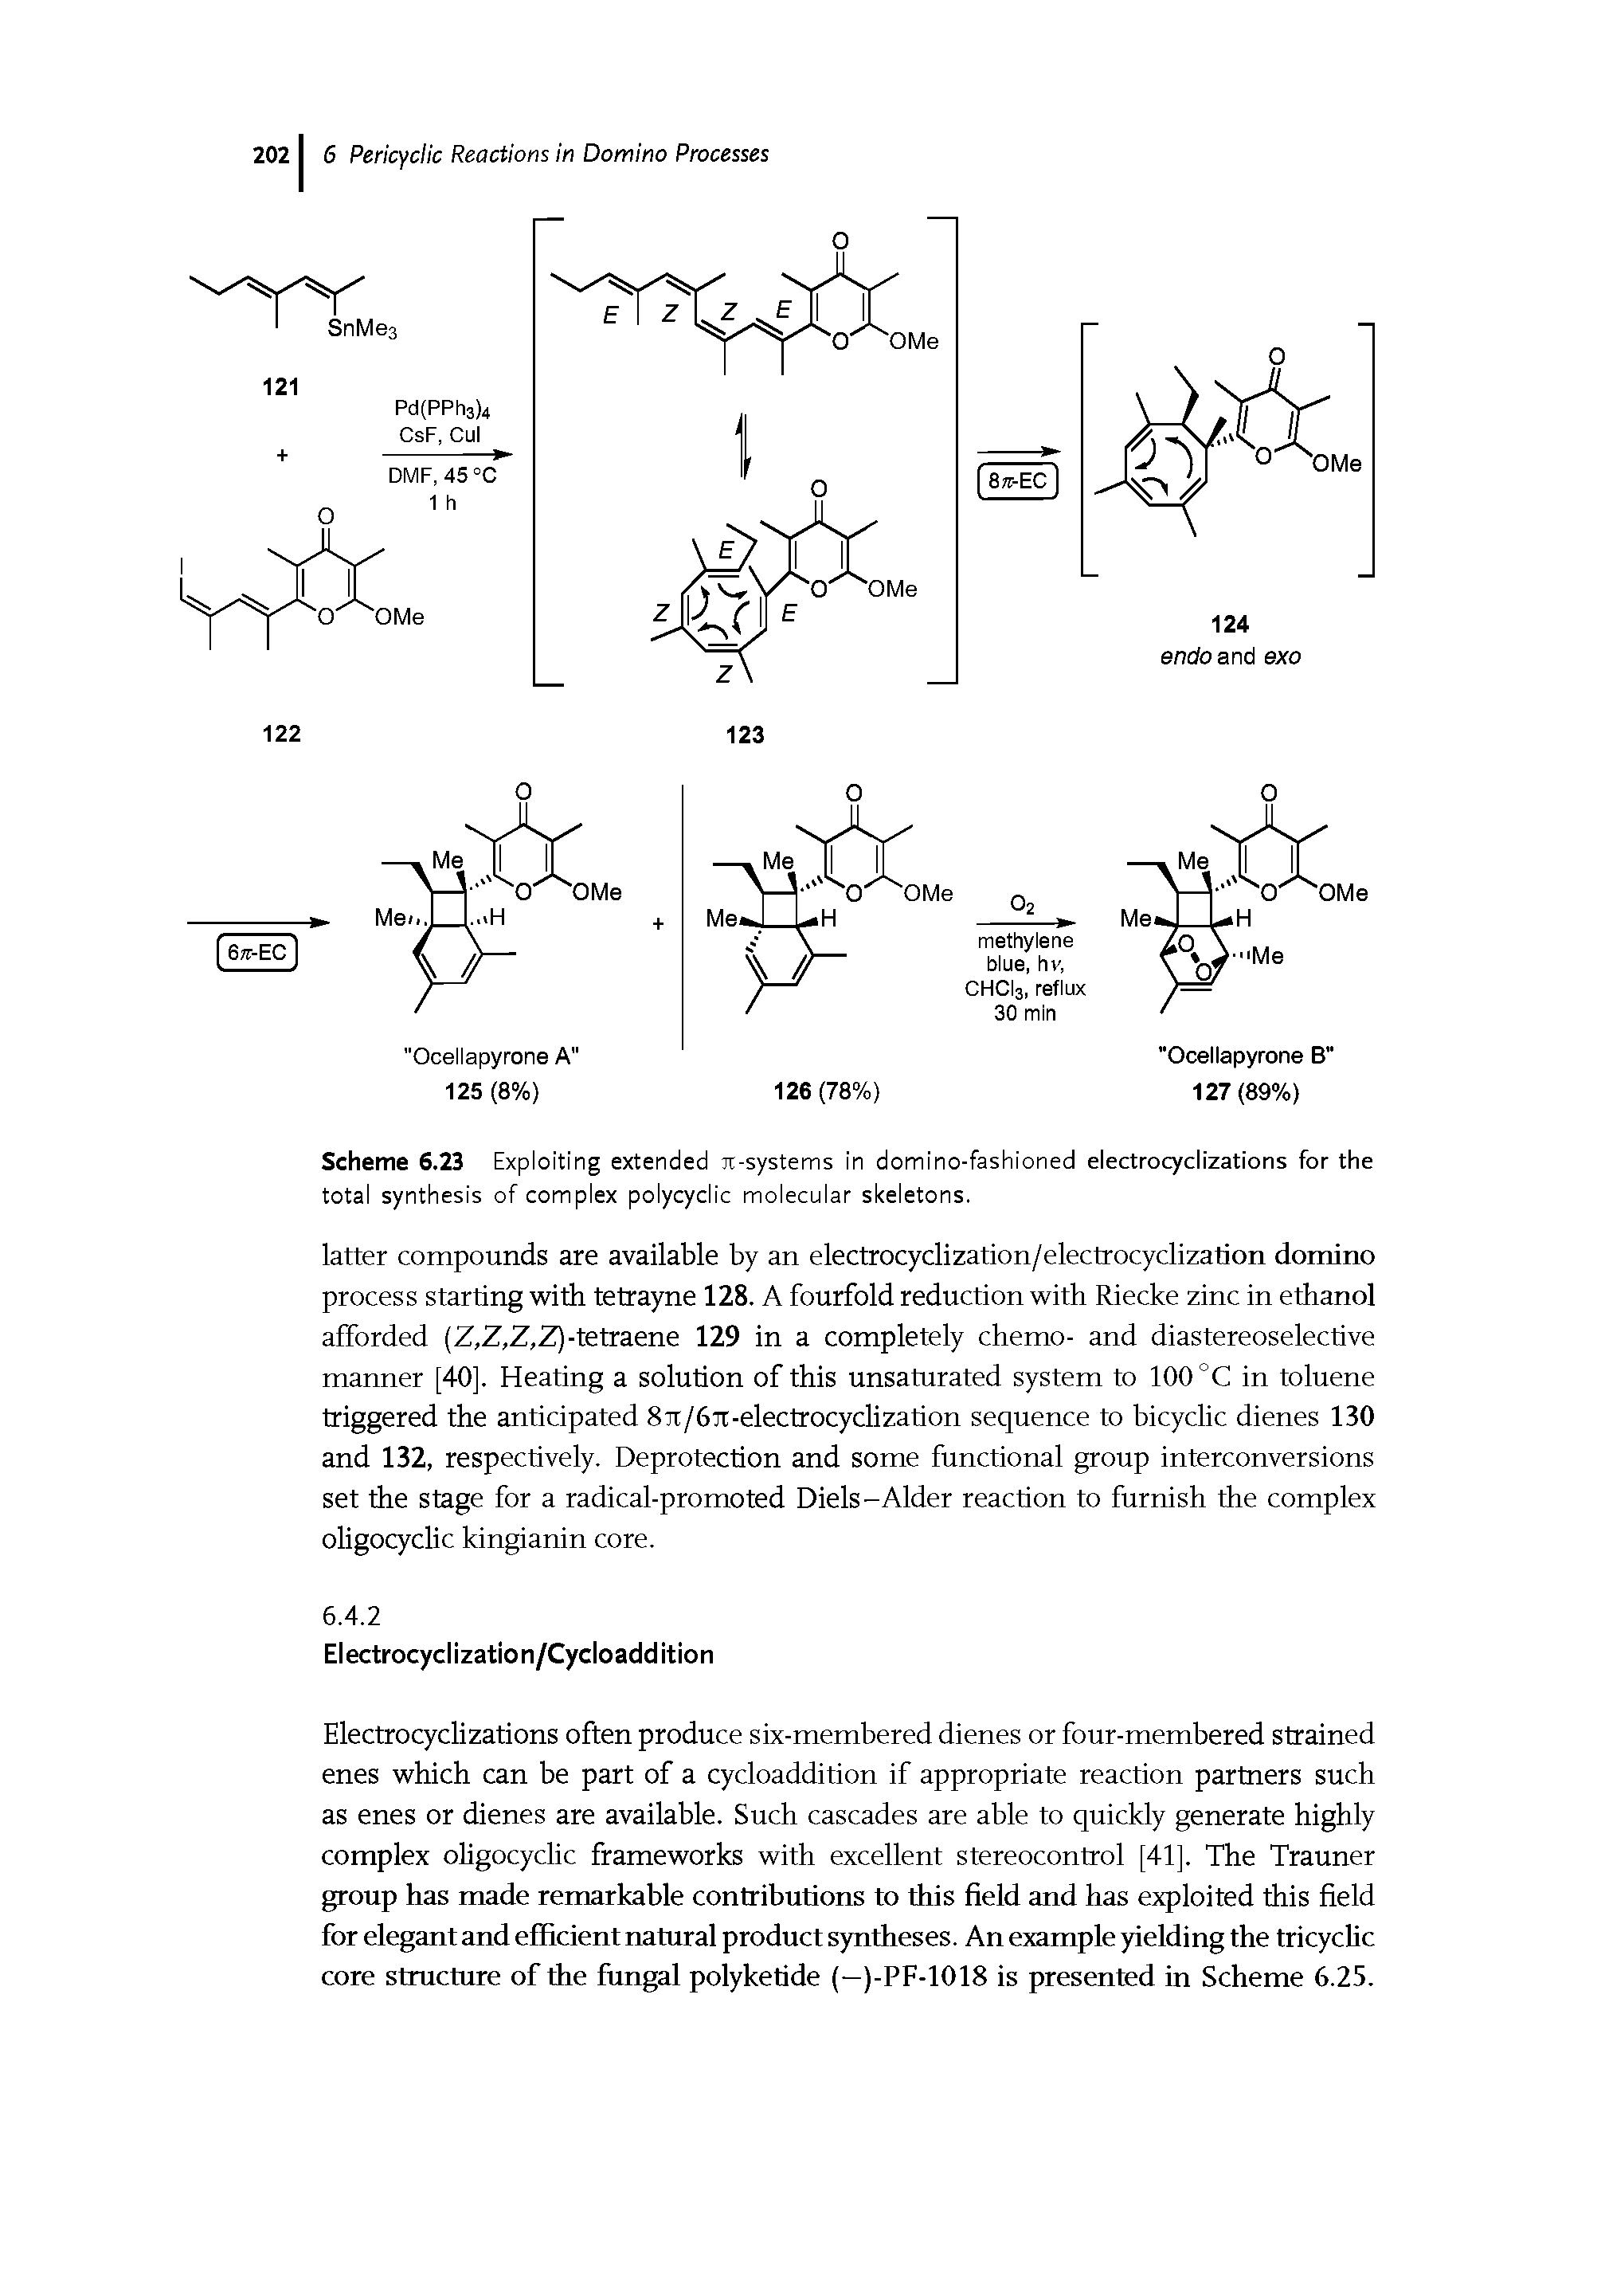 Scheme 6.23 Exploiting extended it-systems in domino-fashioned electrocyclizations for the total synthesis of complex polycyclic molecular skeletons.